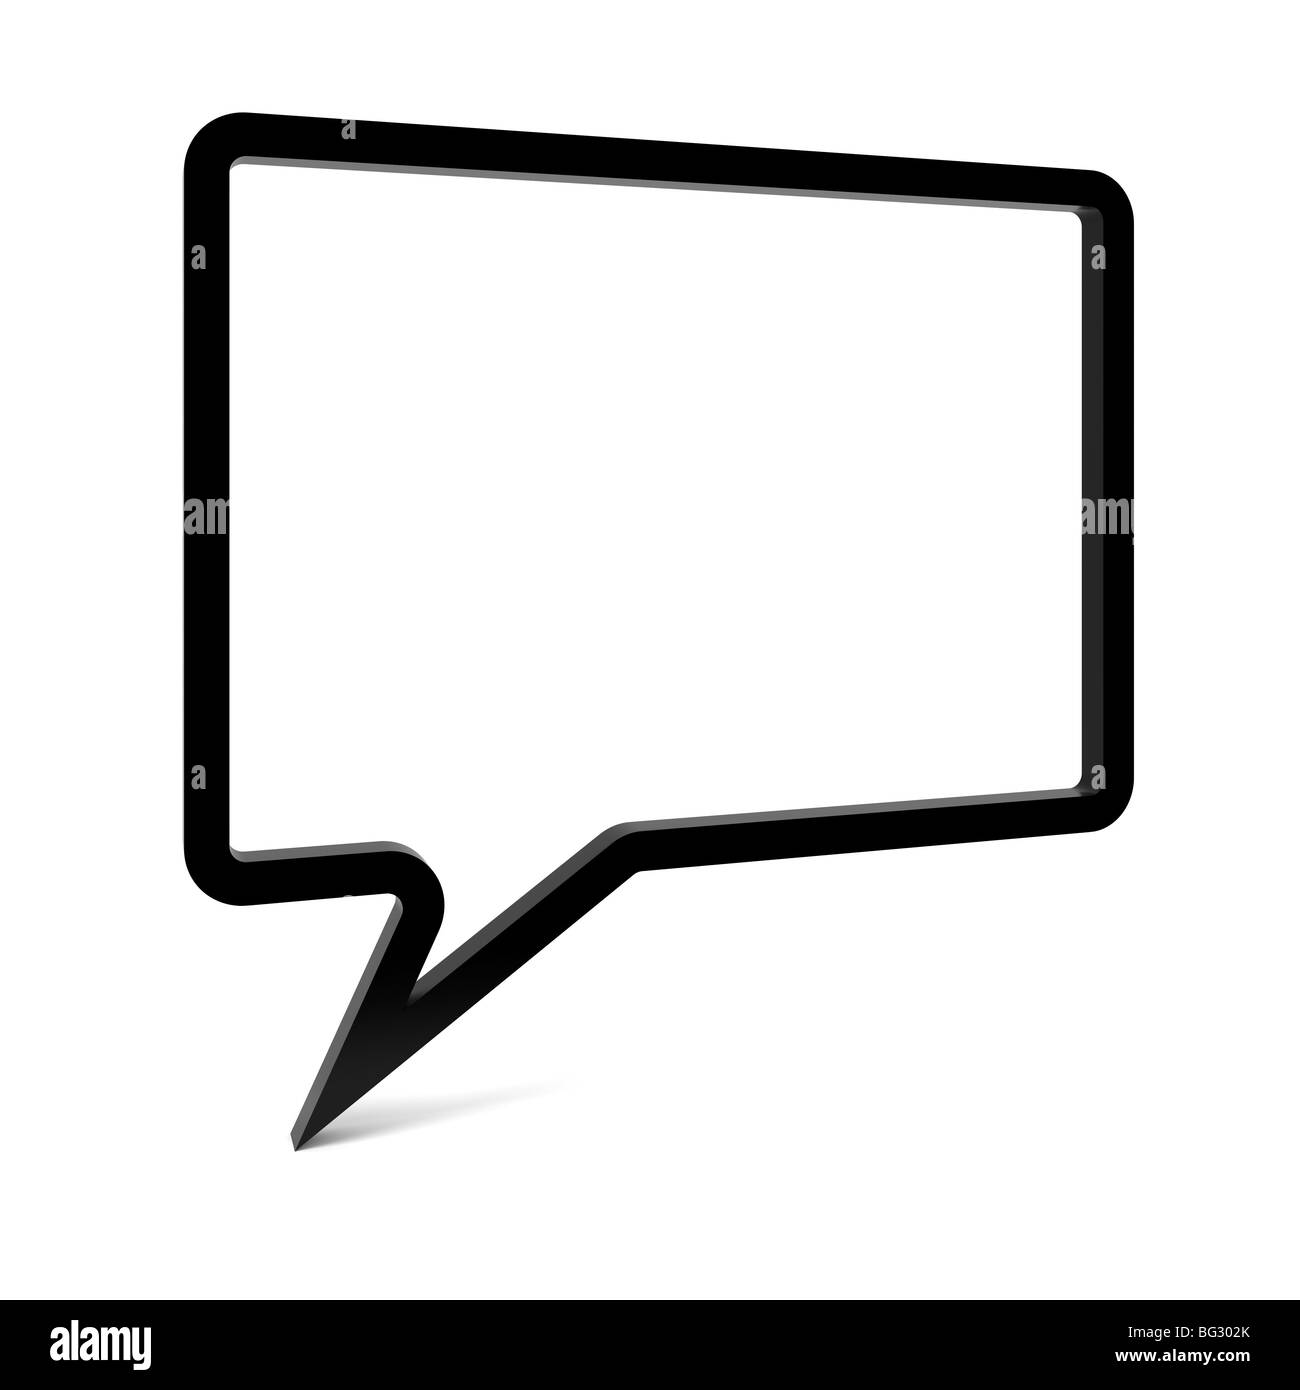 Speech bubble Black and White Stock Photos & Images - Alamy